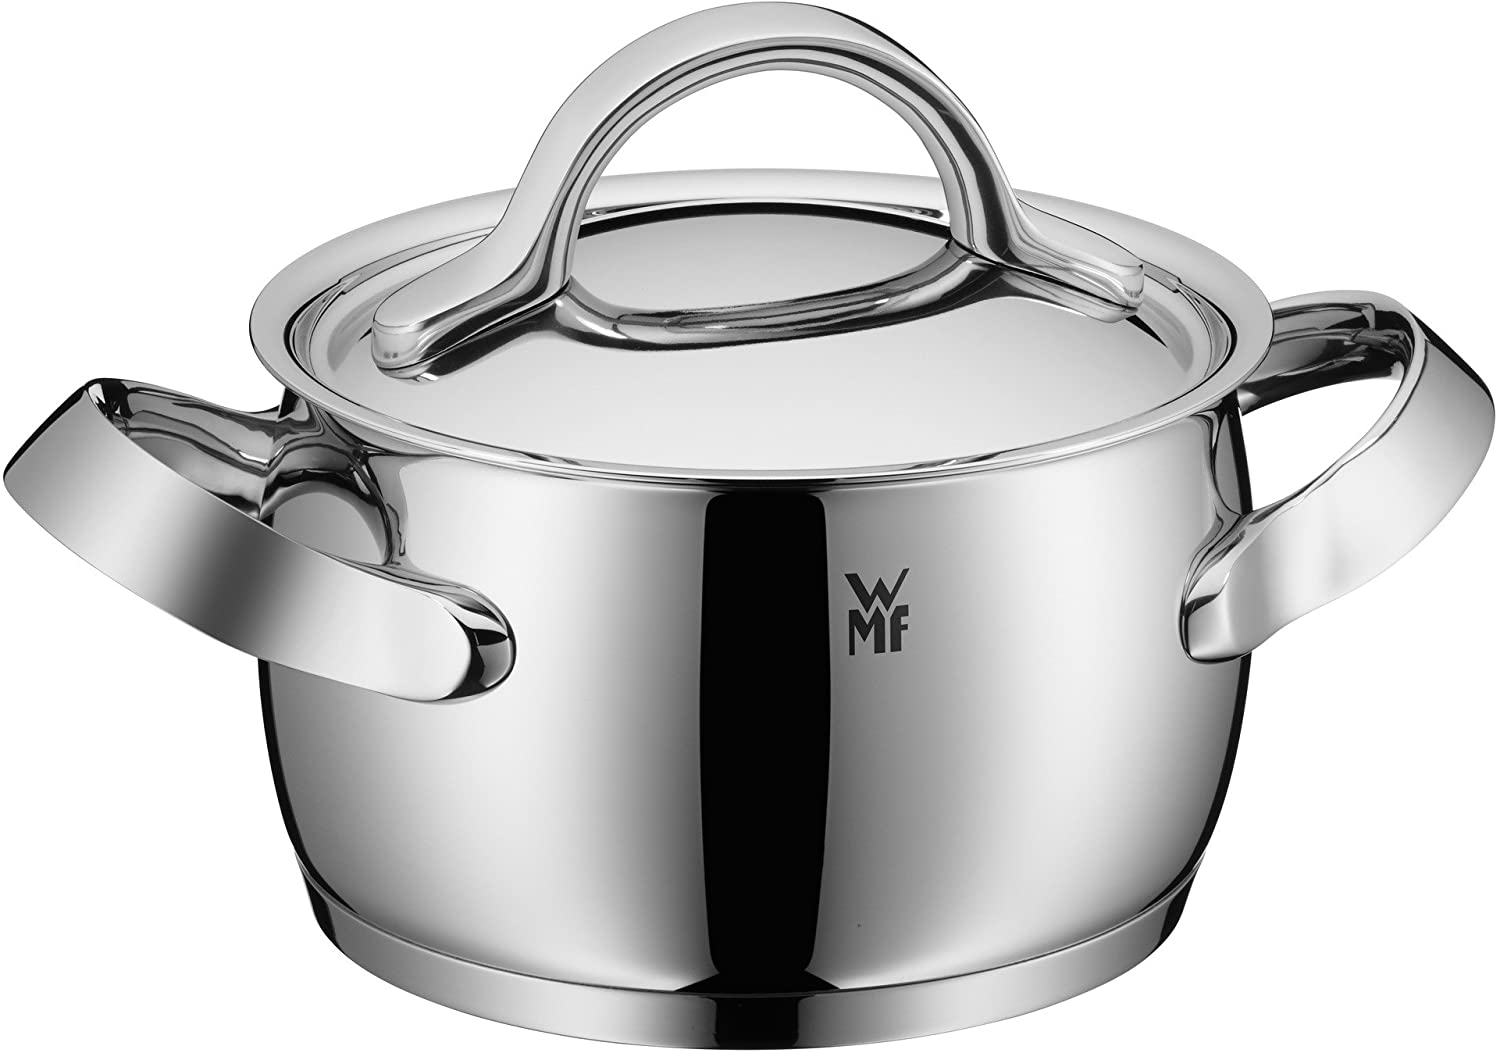 WMF Tall Cooking Pot Diameter 16 cm approx. 2L) Markings Vent Polished Ring Handle Metal Lid Cromargan Stainless Steel Suitable for Induction Cookers Dishwasher Safe Made in Germany